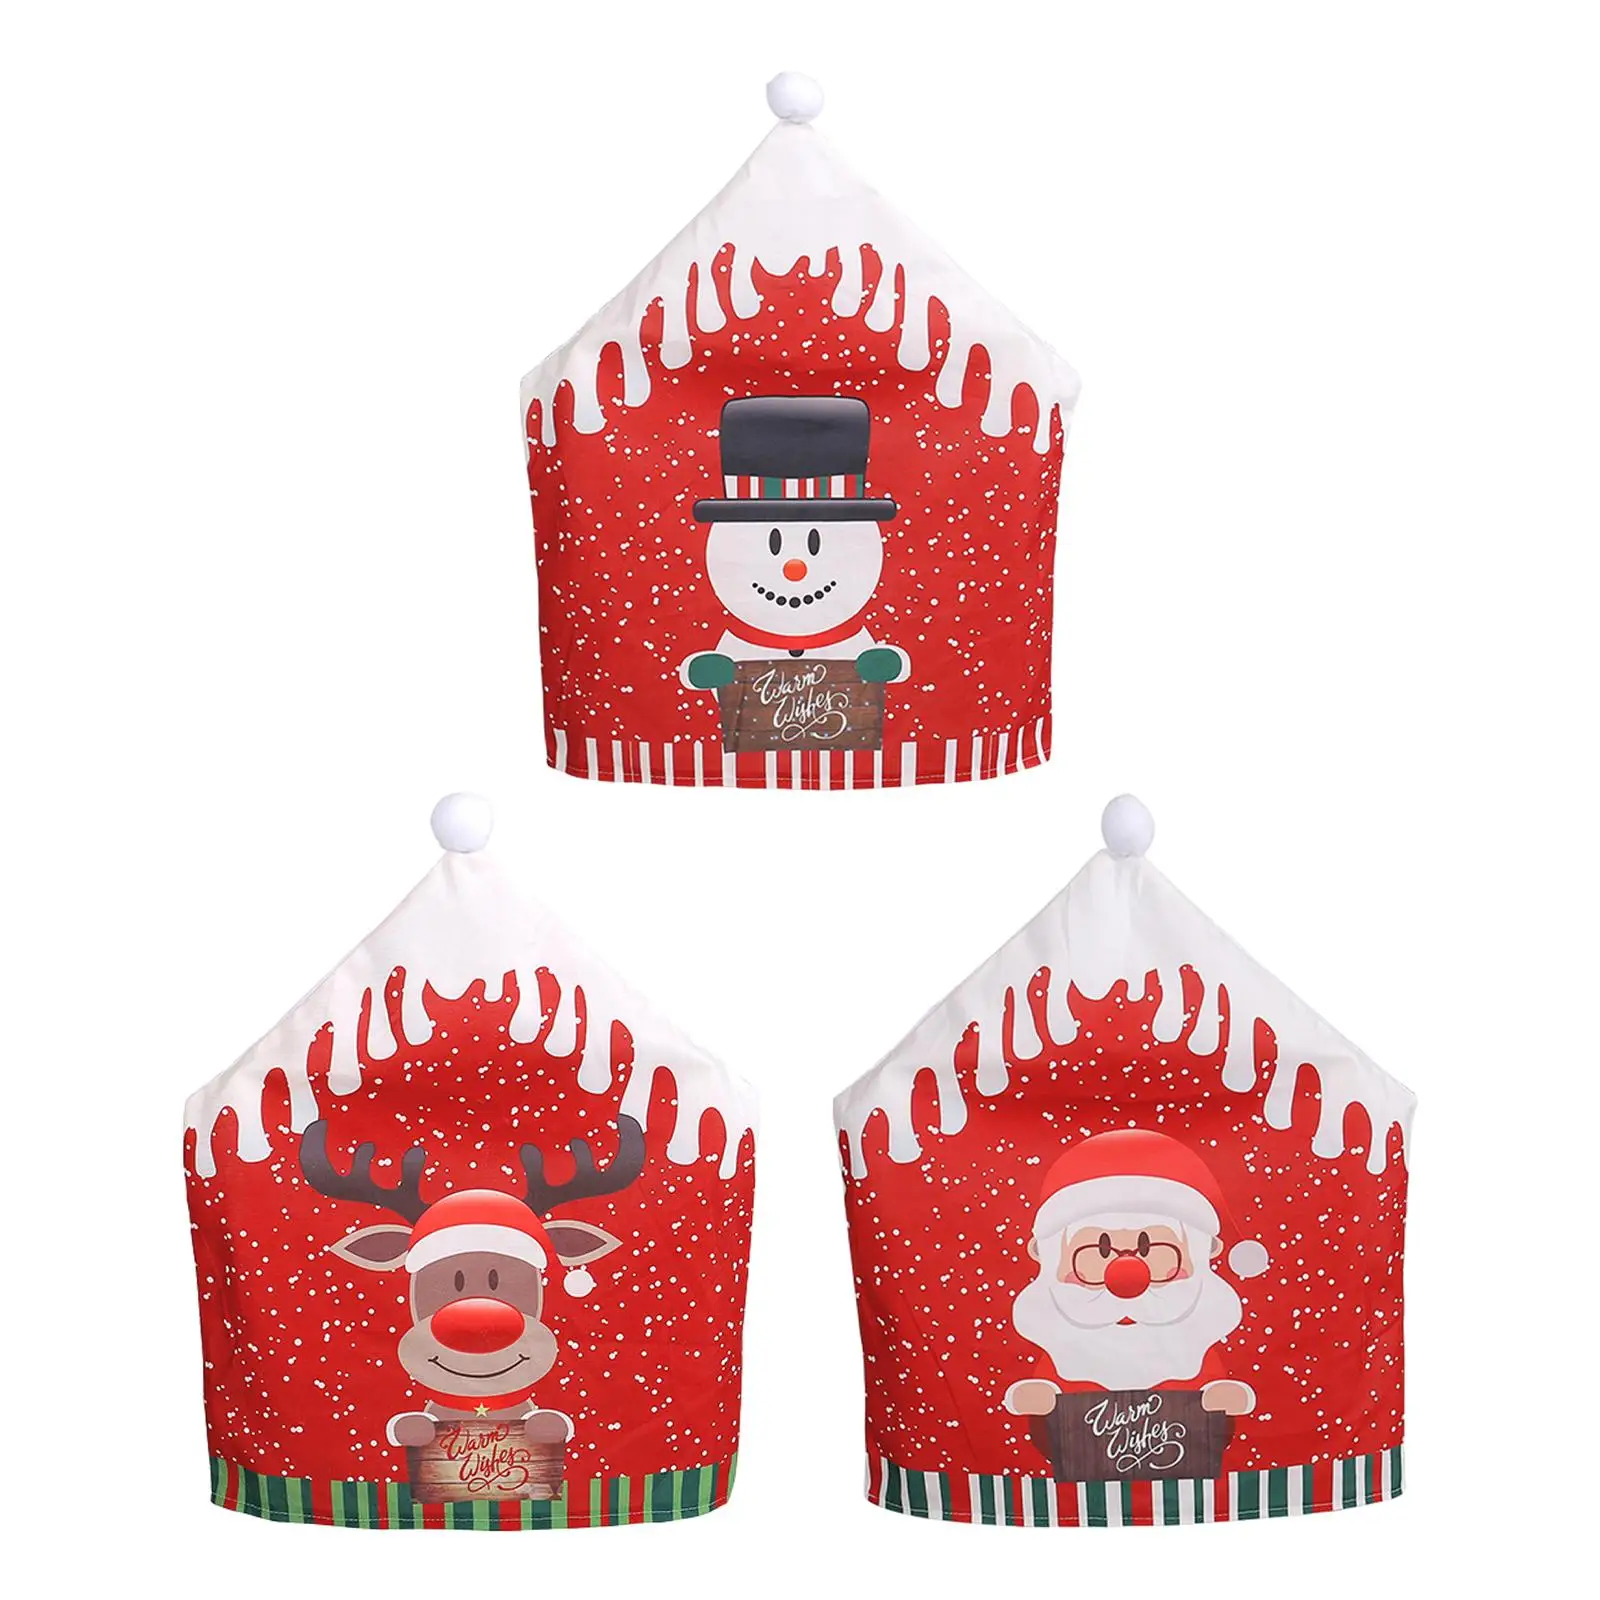 Christmas Chair Slipcover Party Favor Banquet Chair Christmas Chair Cover for Festive Kitchen Holiday Dining Room Restaurant